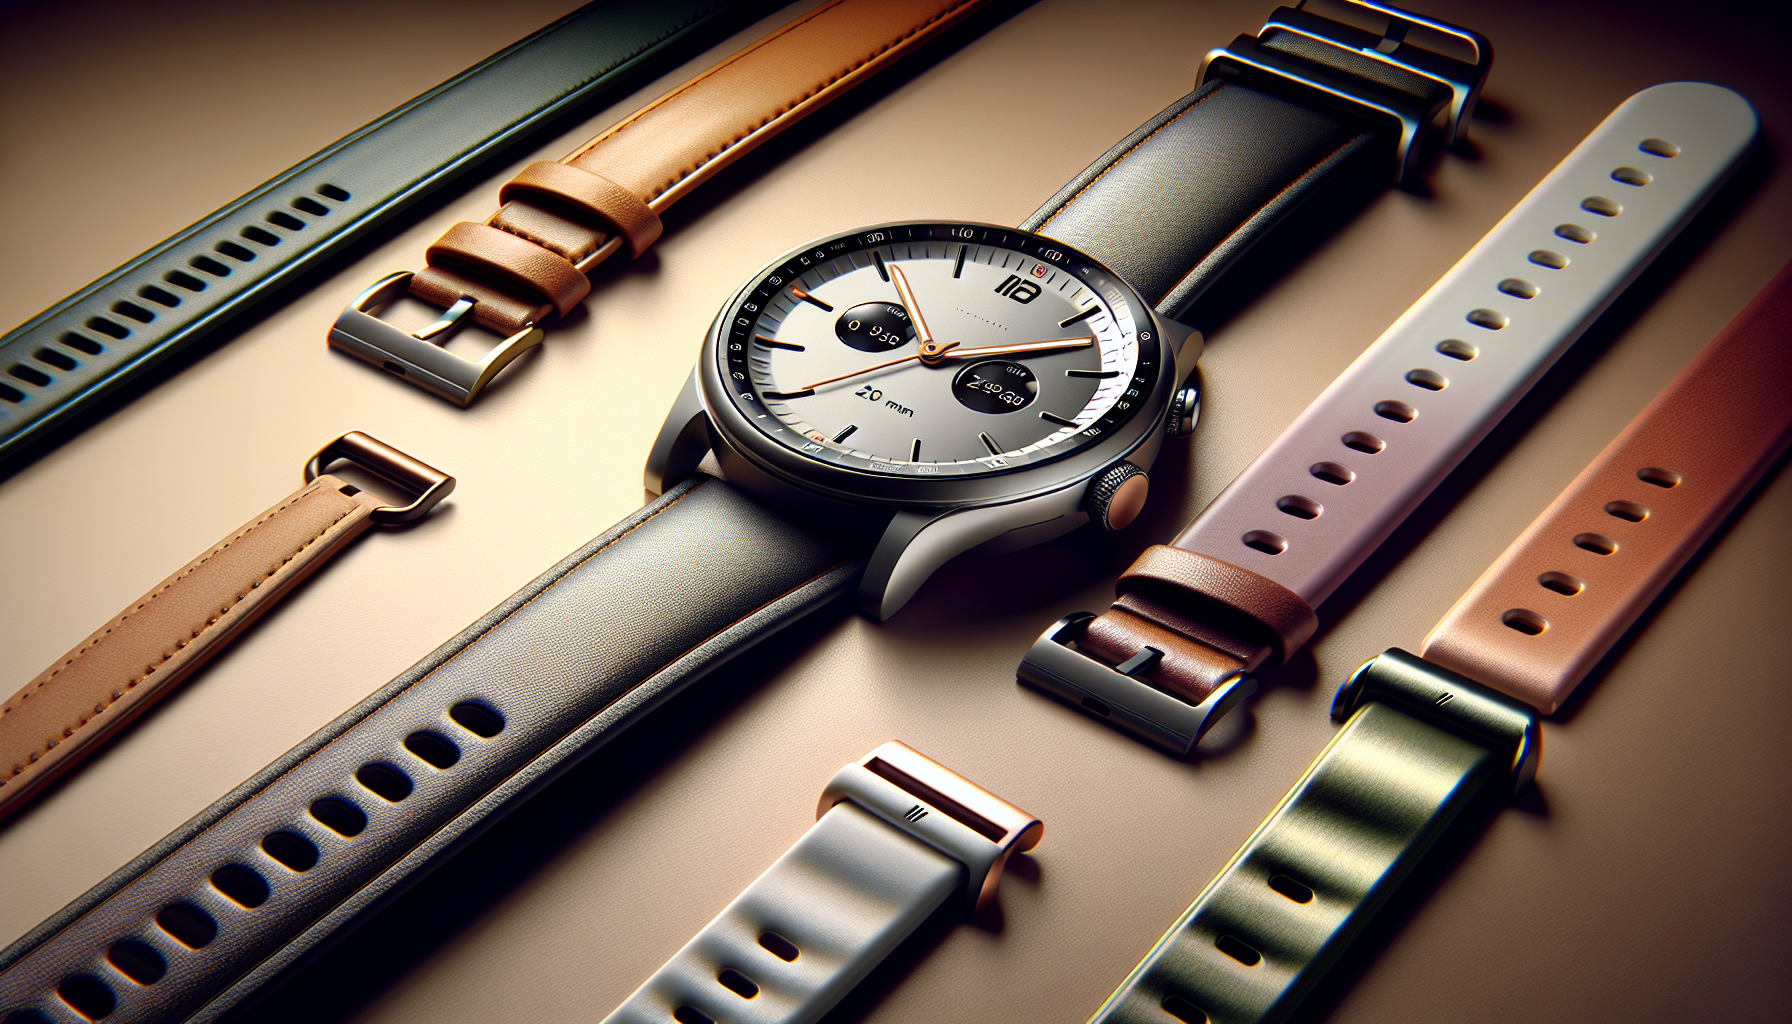 Upgrade smartwatch style with high-quality 20 mm bands